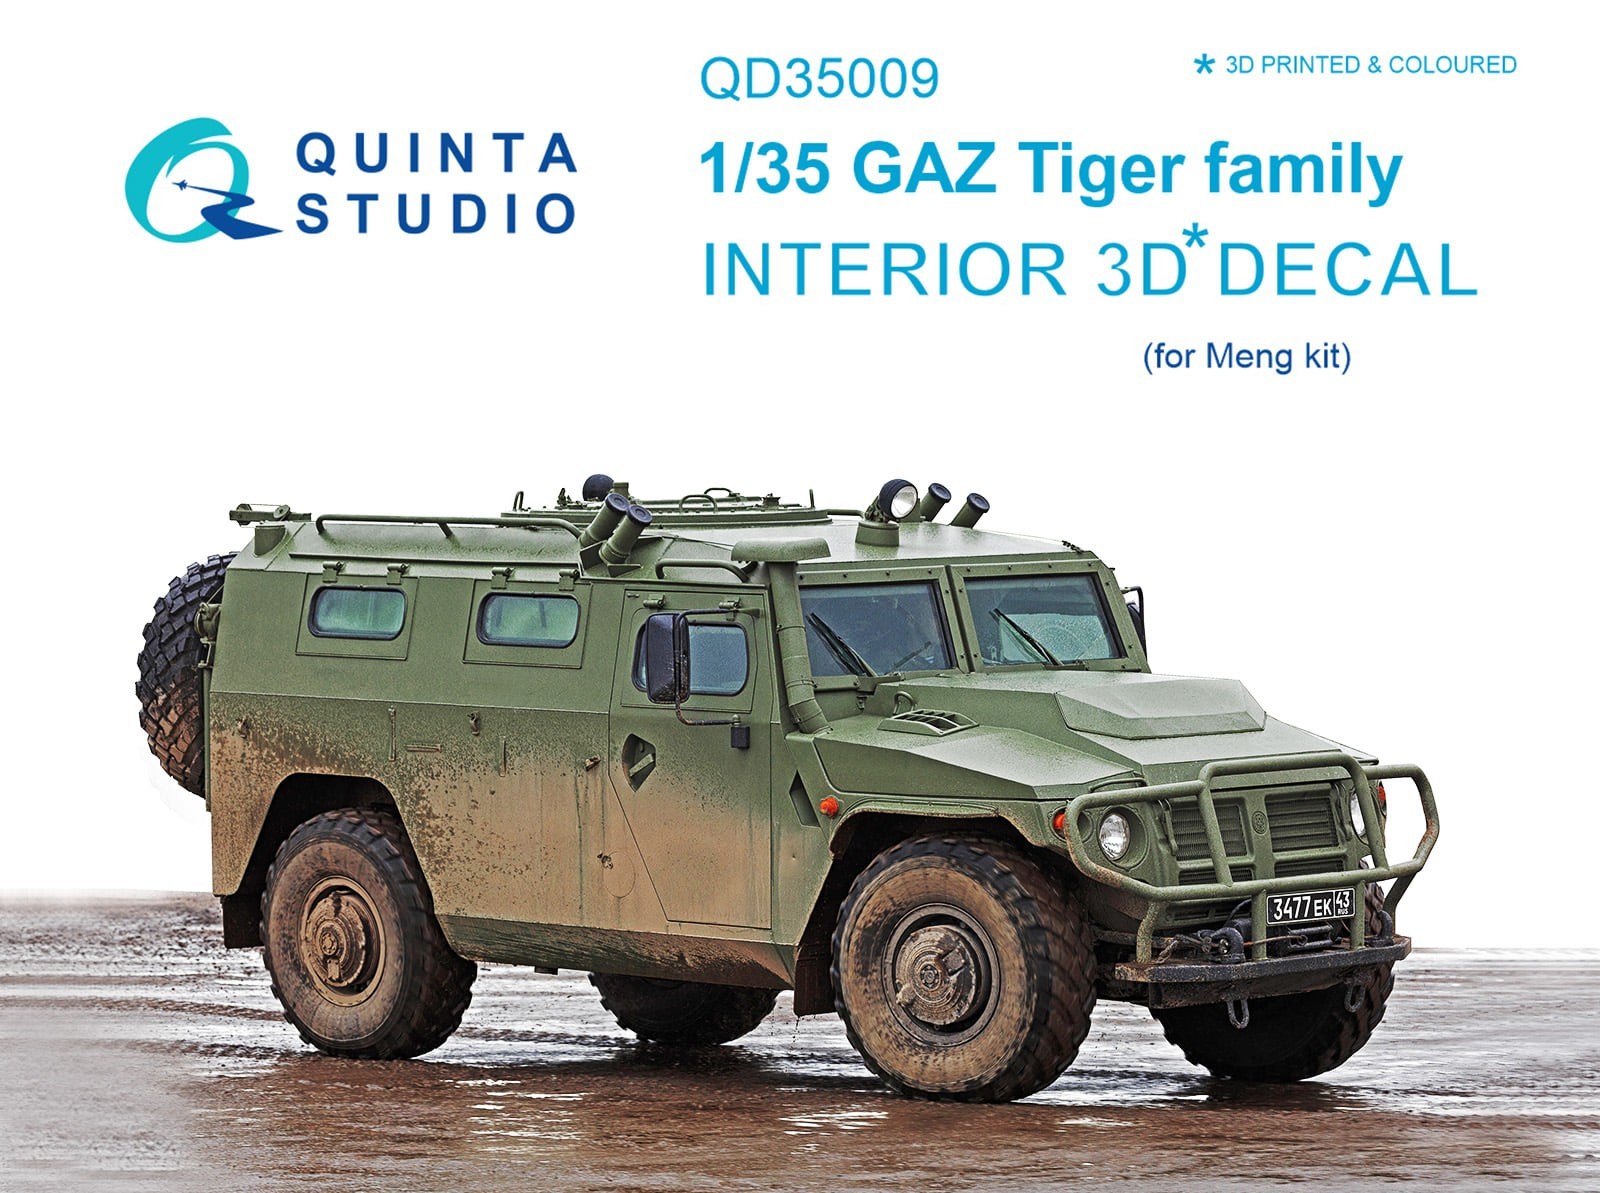 QD35009 GAZ Tiger family 3D-Printed & coloured Interior on decal paper (for Meng kits)